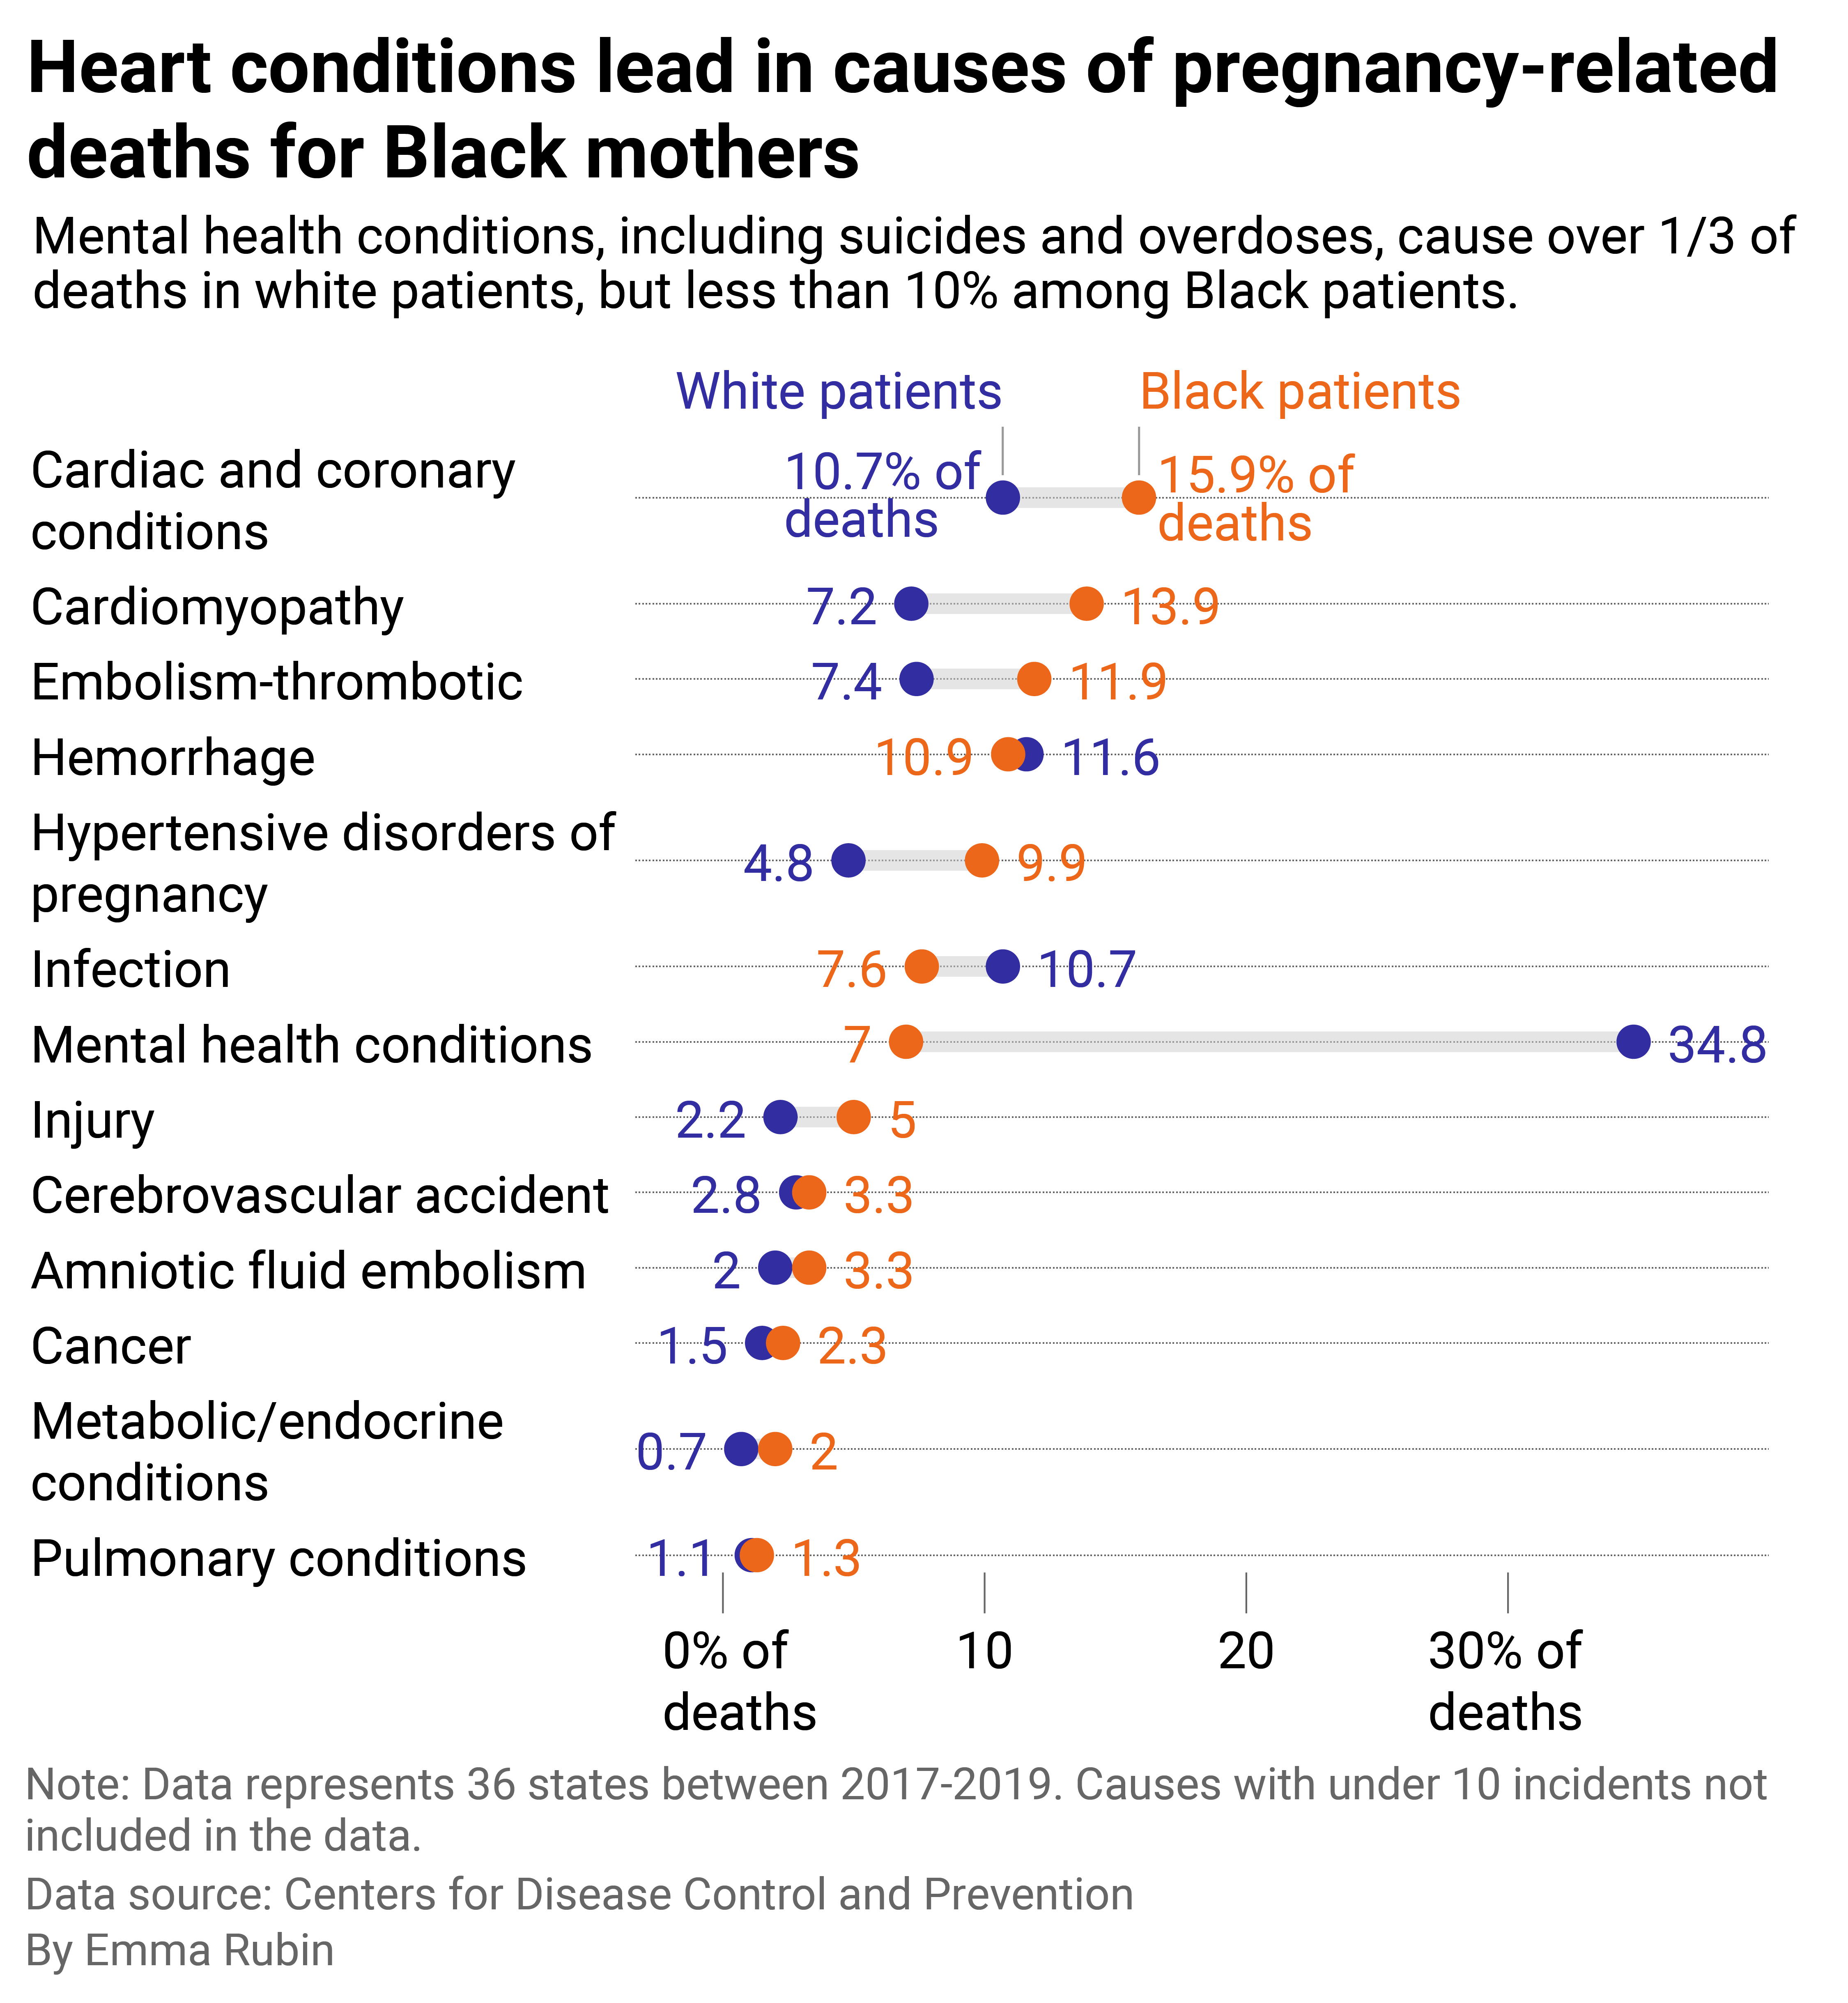 Bullet bar chart showing the conditions that are more frequently the causes for pregnancy-related deaths for Black mothers versus the overall population.